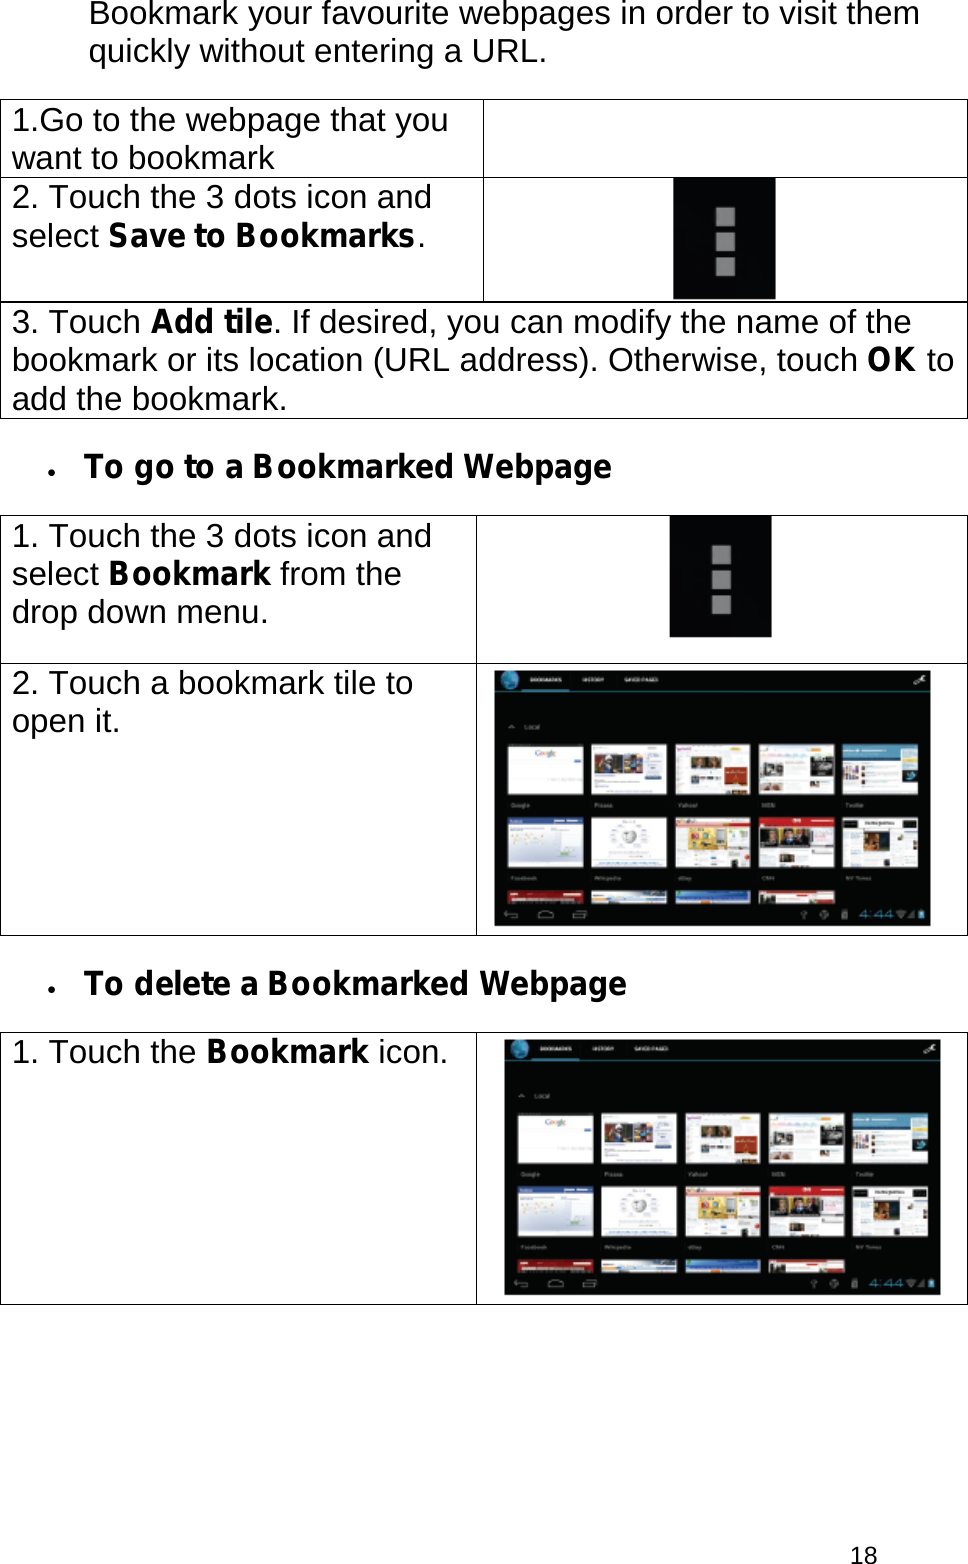  18 Bookmark your favourite webpages in order to visit them quickly without entering a URL. 1.Go to the webpage that you want to bookmark  2. Touch the 3 dots icon and select Save to Bookmarks.  3. Touch Add tile. If desired, you can modify the name of the bookmark or its location (URL address). Otherwise, touch OK to add the bookmark. • To go to a Bookmarked Webpage 1. Touch the 3 dots icon and select Bookmark from the drop down menu.   2. Touch a bookmark tile to open it.   • To delete a Bookmarked Webpage 1. Touch the Bookmark icon.   